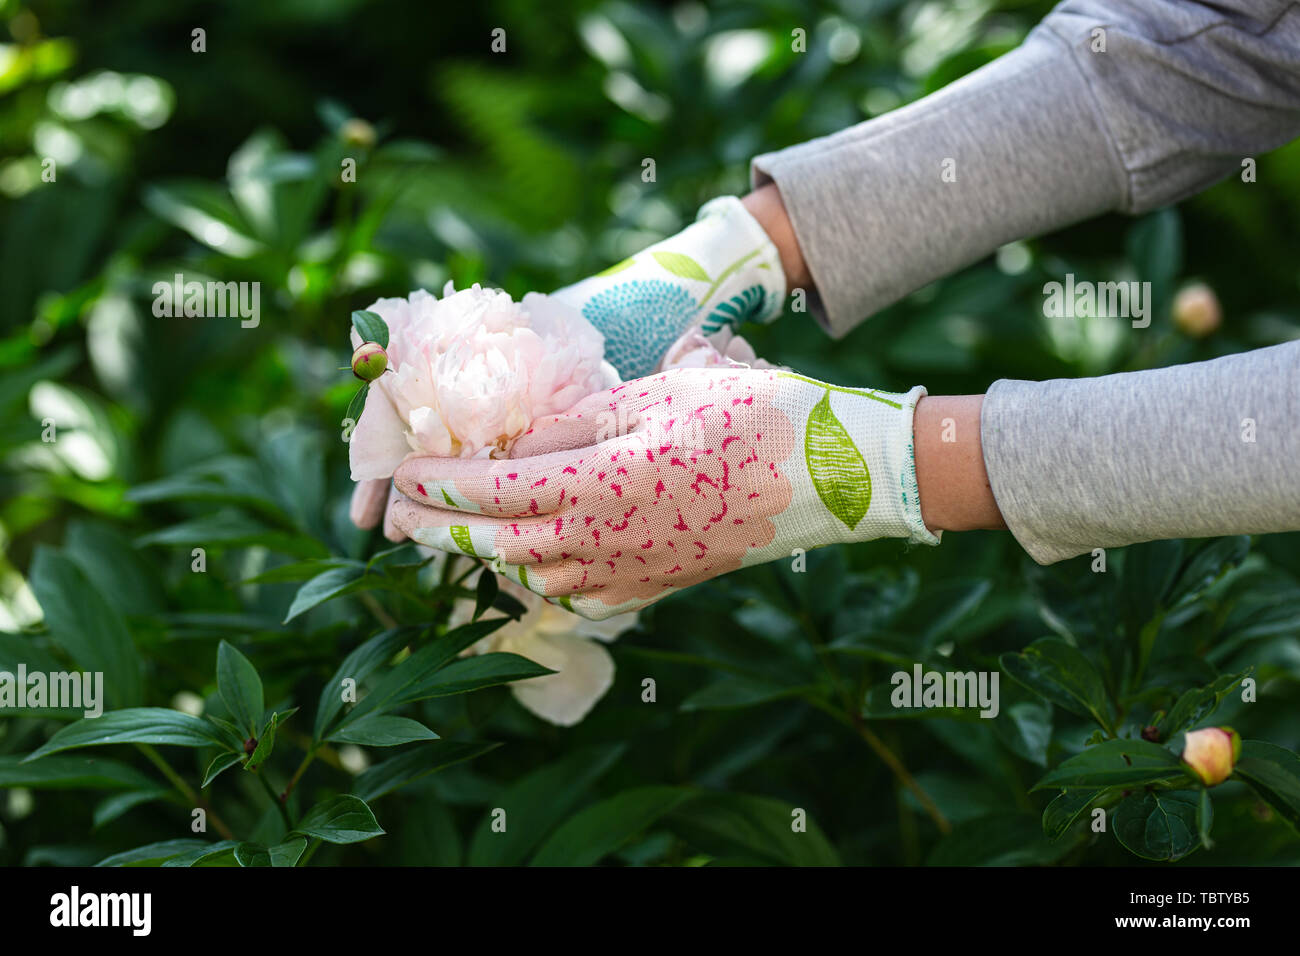 Woman gardener holding a peony in her hand. Stock Photo